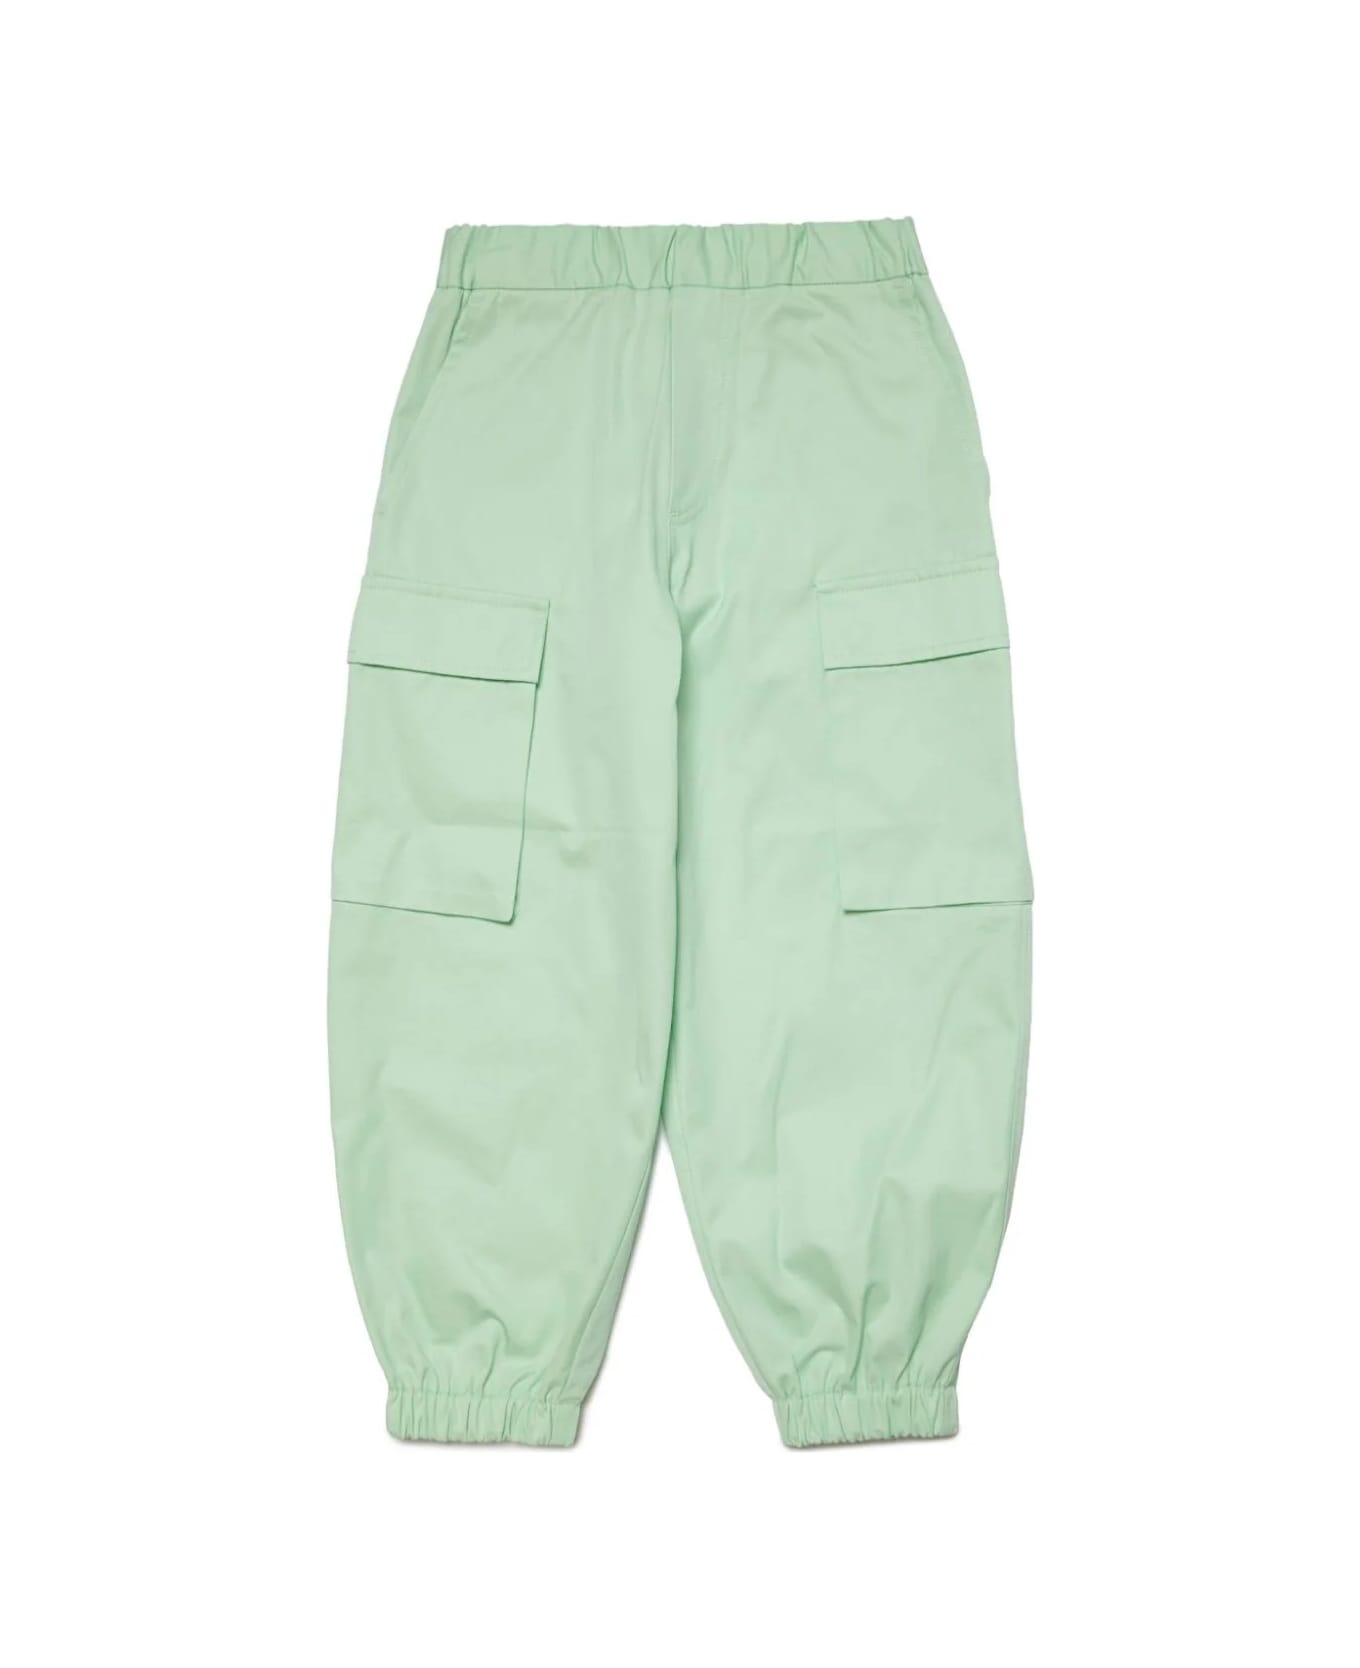 MM6 Maison Margiela Tapered Trousers - Green